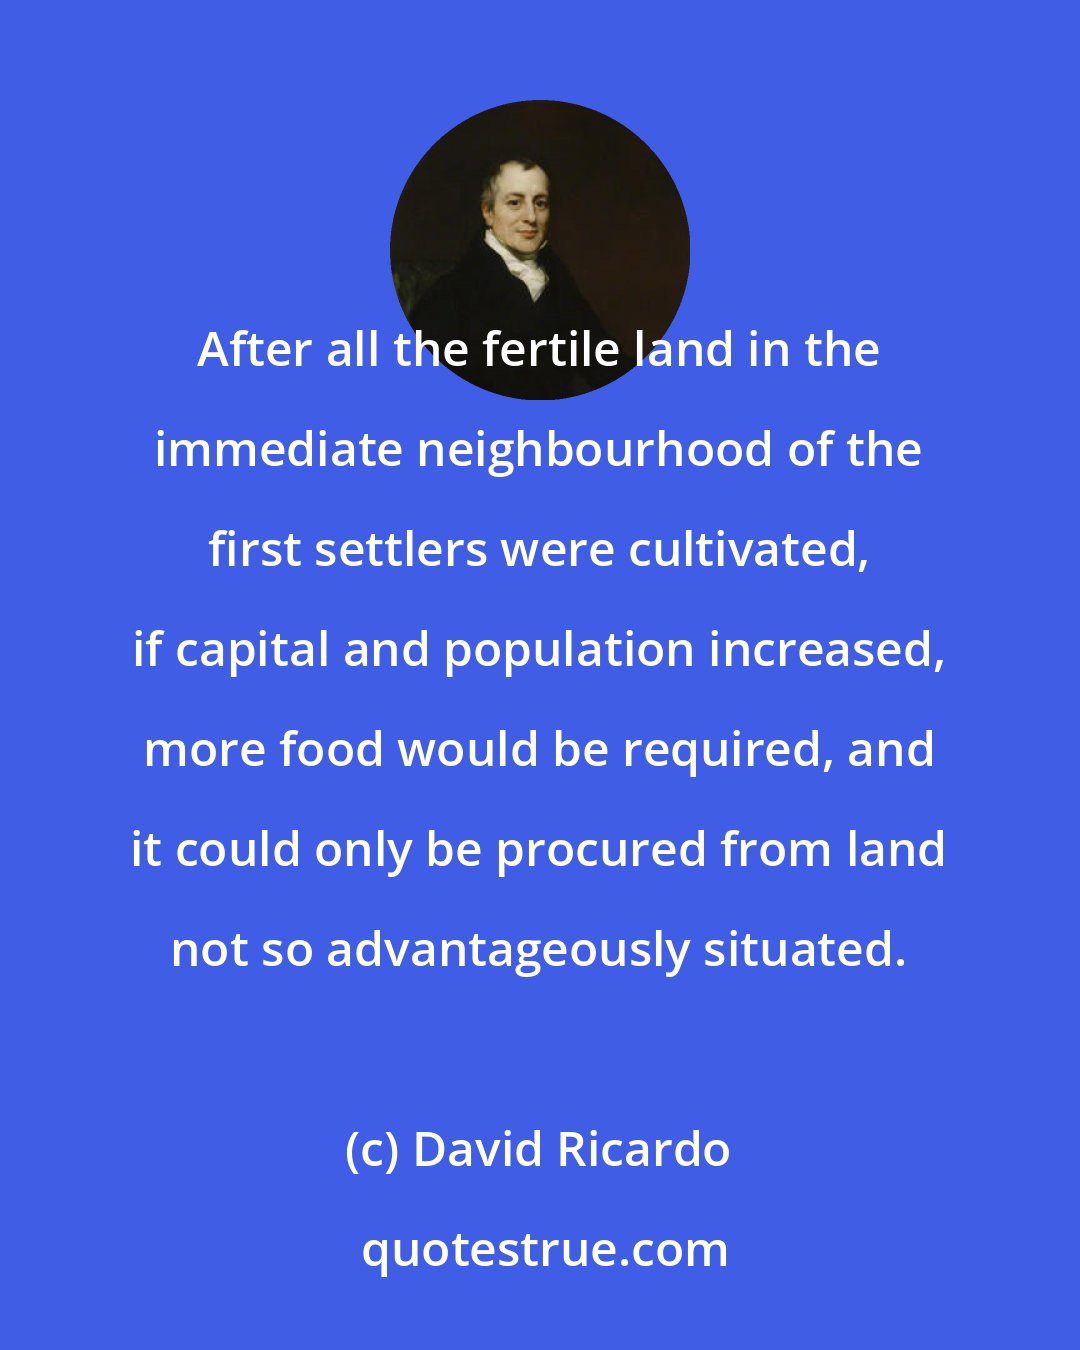 David Ricardo: After all the fertile land in the immediate neighbourhood of the first settlers were cultivated, if capital and population increased, more food would be required, and it could only be procured from land not so advantageously situated.